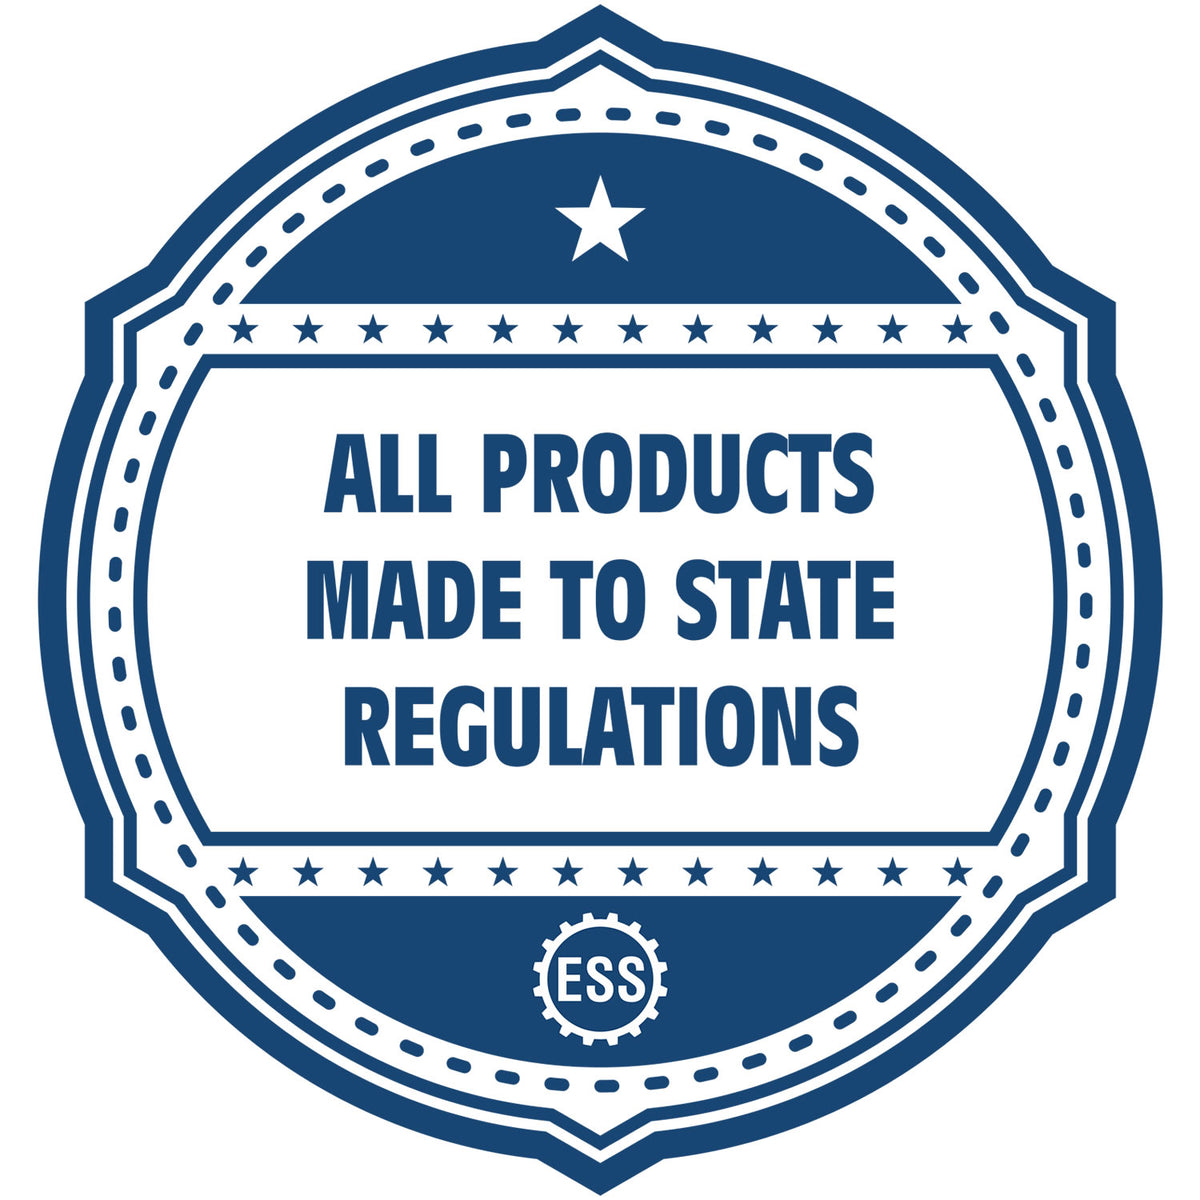 An icon or badge element for the Extended Long Reach Oklahoma Architect Seal Embosser showing that this product is made in compliance with state regulations.